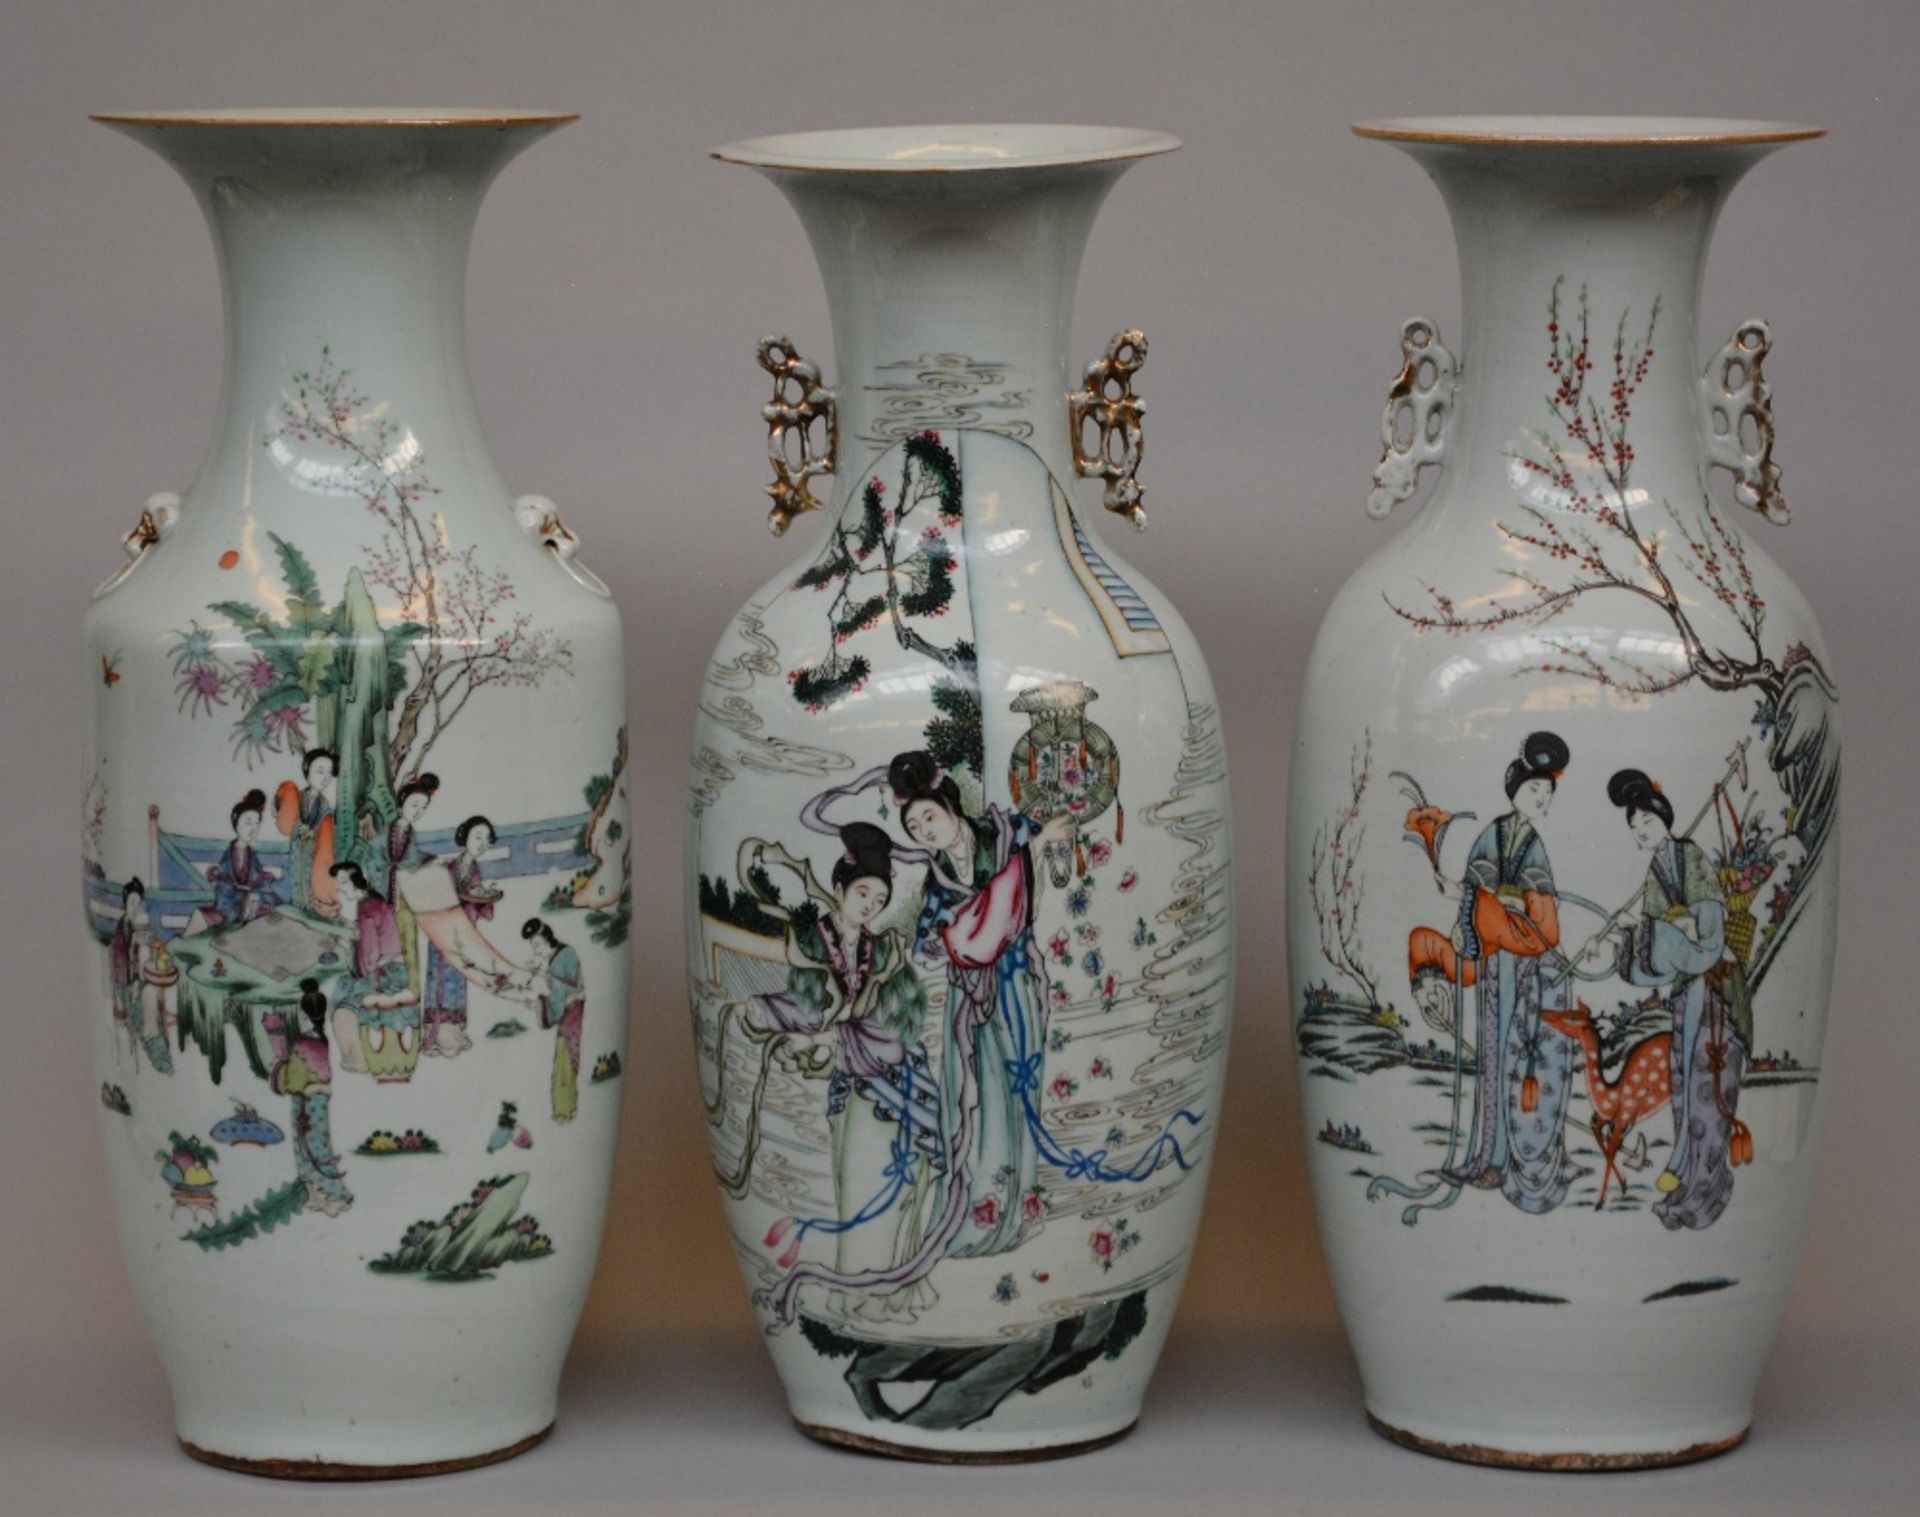 Three Chinese polychrome vases, decorated with genre scenes, H 58 - 57 cm